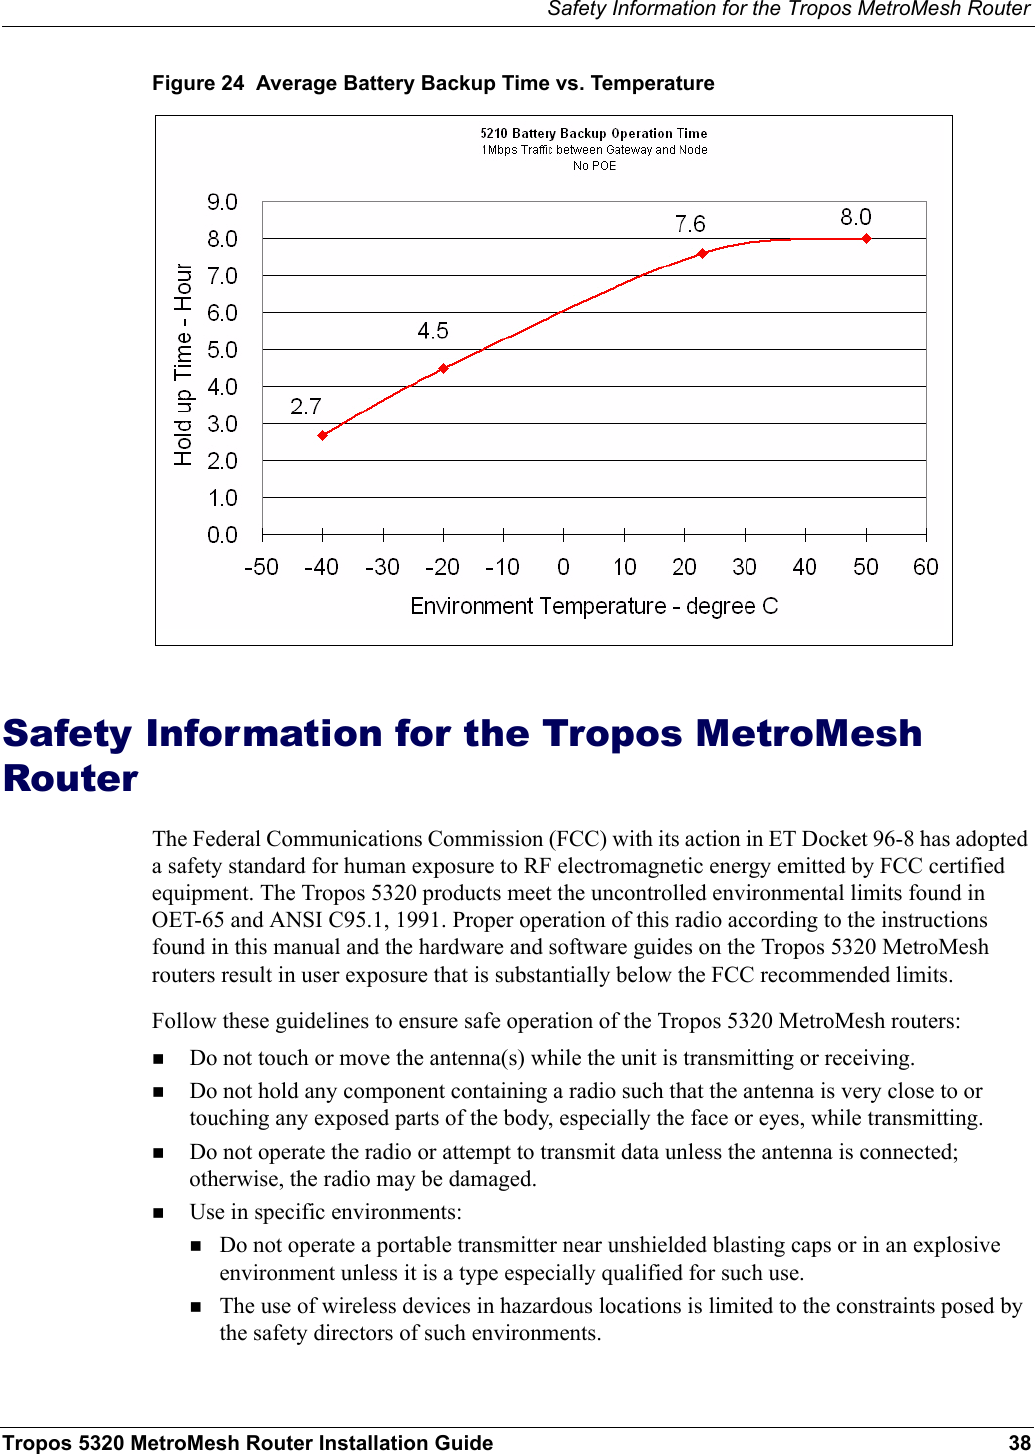 Safety Information for the Tropos MetroMesh RouterTropos 5320 MetroMesh Router Installation Guide 38Figure 24  Average Battery Backup Time vs. TemperatureSafety Information for the Tropos MetroMesh RouterThe Federal Communications Commission (FCC) with its action in ET Docket 96-8 has adopted a safety standard for human exposure to RF electromagnetic energy emitted by FCC certified equipment. The Tropos 5320 products meet the uncontrolled environmental limits found in OET-65 and ANSI C95.1, 1991. Proper operation of this radio according to the instructions found in this manual and the hardware and software guides on the Tropos 5320 MetroMesh routers result in user exposure that is substantially below the FCC recommended limits.Follow these guidelines to ensure safe operation of the Tropos 5320 MetroMesh routers:Do not touch or move the antenna(s) while the unit is transmitting or receiving.Do not hold any component containing a radio such that the antenna is very close to or touching any exposed parts of the body, especially the face or eyes, while transmitting. Do not operate the radio or attempt to transmit data unless the antenna is connected; otherwise, the radio may be damaged.Use in specific environments:Do not operate a portable transmitter near unshielded blasting caps or in an explosive environment unless it is a type especially qualified for such use.The use of wireless devices in hazardous locations is limited to the constraints posed by the safety directors of such environments.